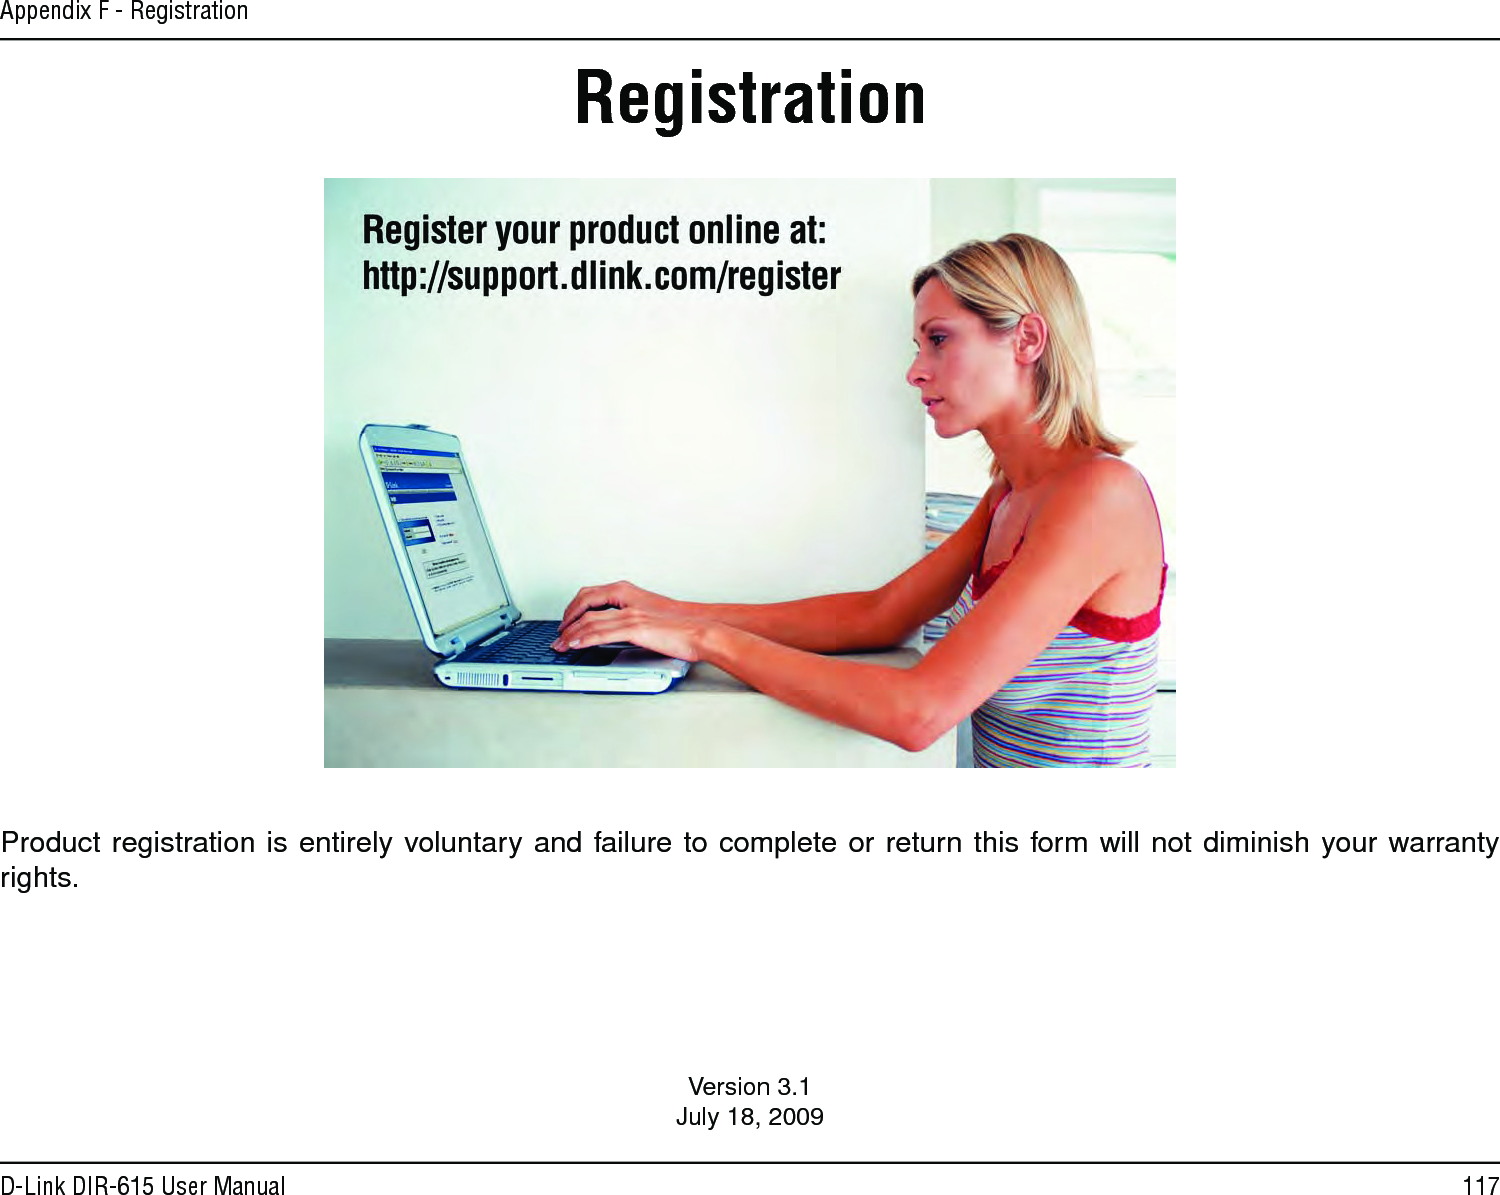 117D-Link DIR-615 User ManualAppendix F - RegistrationVersion 3.1July 18, 2009Product registration is entirely voluntary and failure to complete or return this form will not diminish your warranty rights.Registration